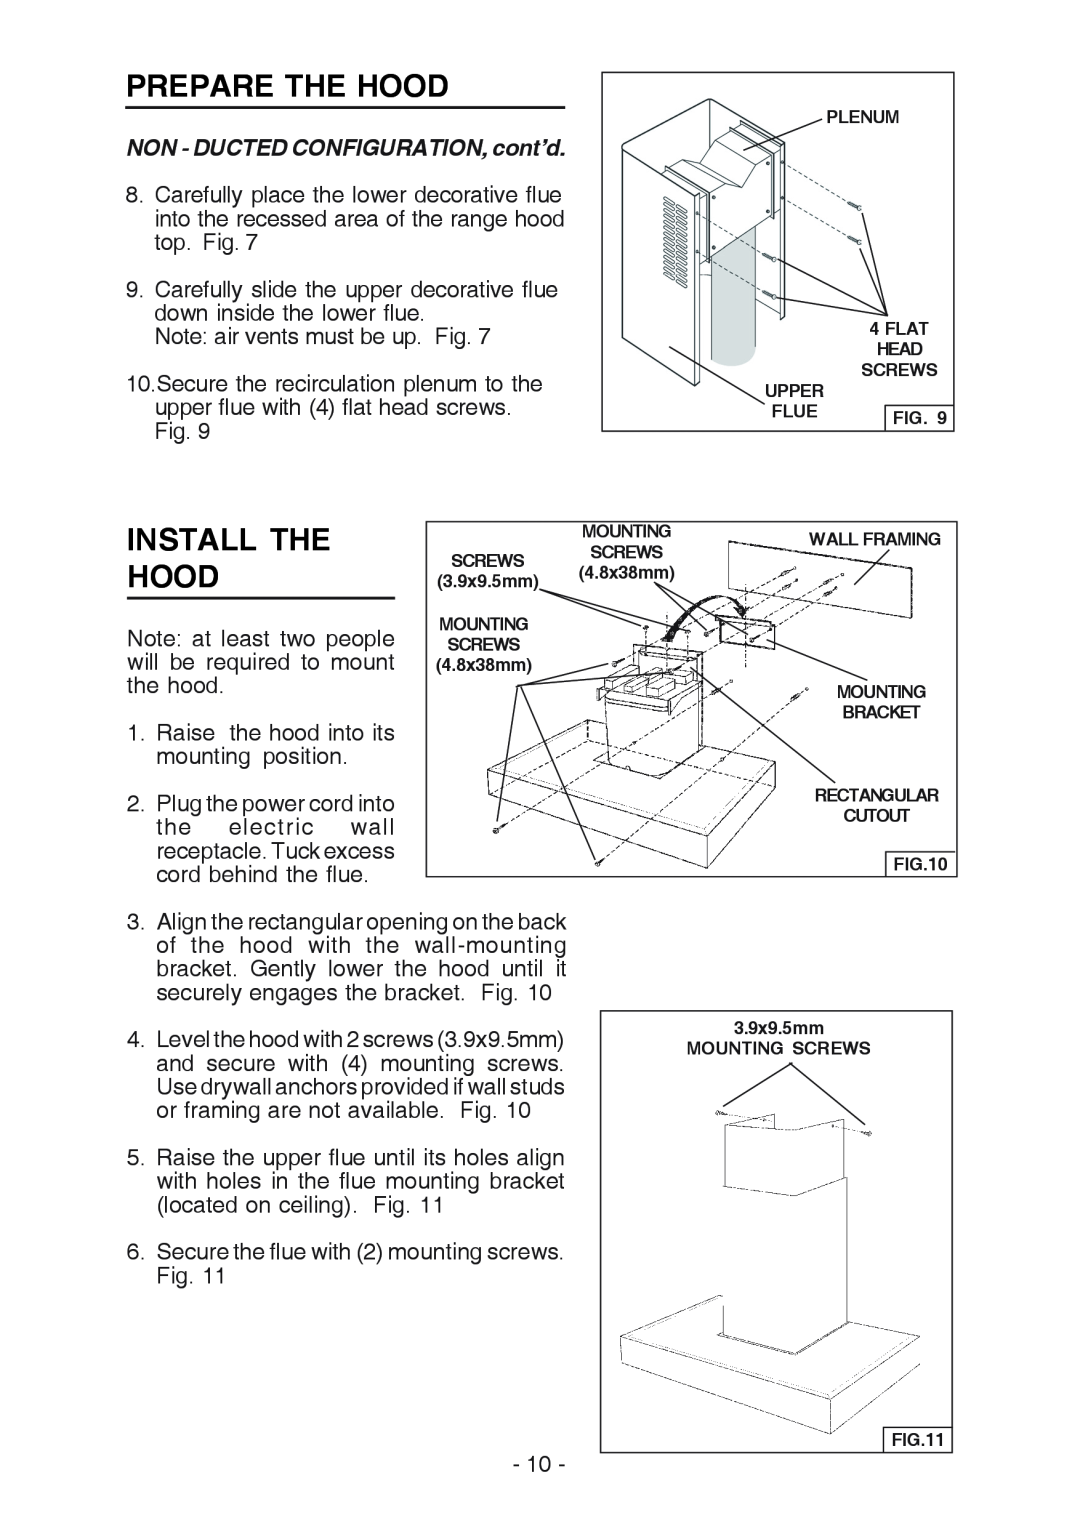 Broan RM533604 manual Install The Hood, NON - DUCTED CONFIGURATION, cont’d, Prepare The Hood 